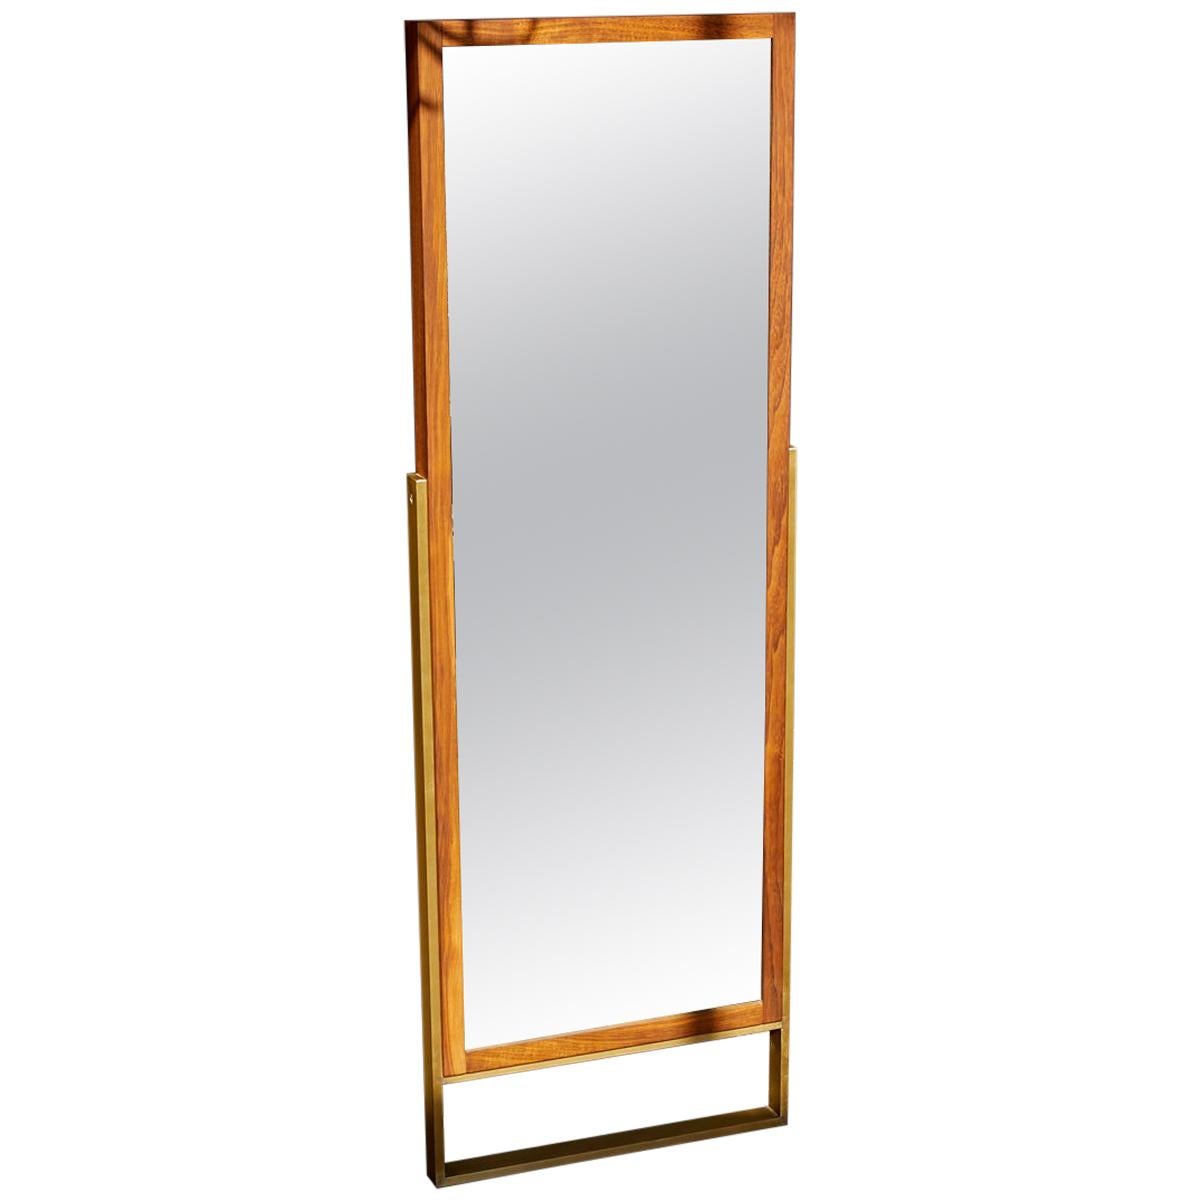 Oiled Floor Mirrors and Full-Length Mirrors